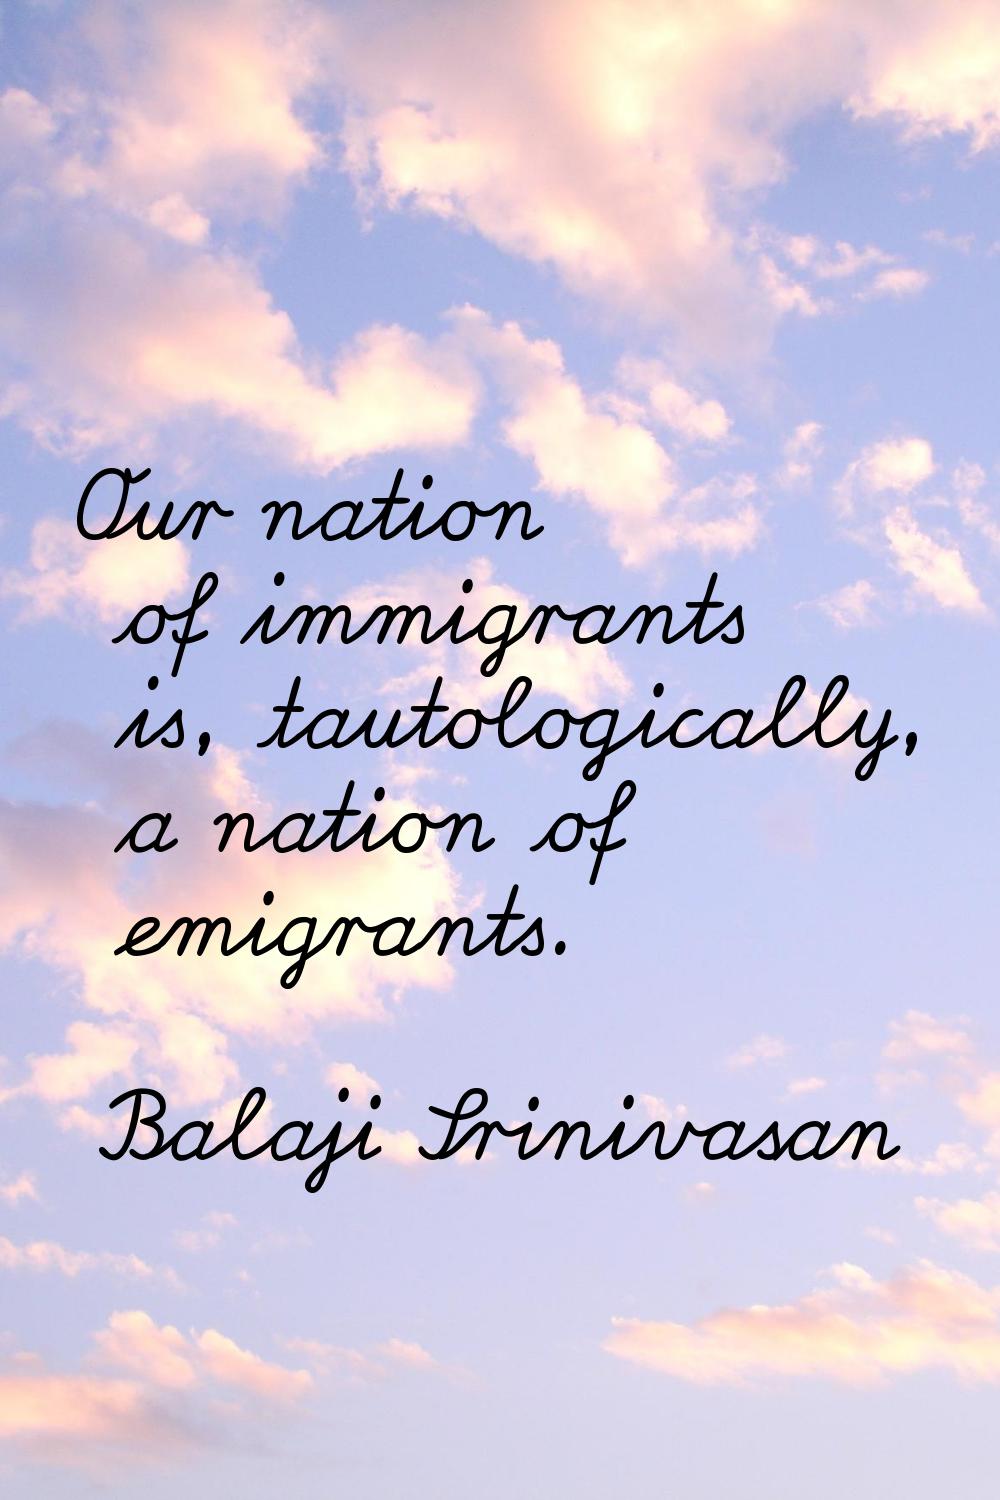 Our nation of immigrants is, tautologically, a nation of emigrants.